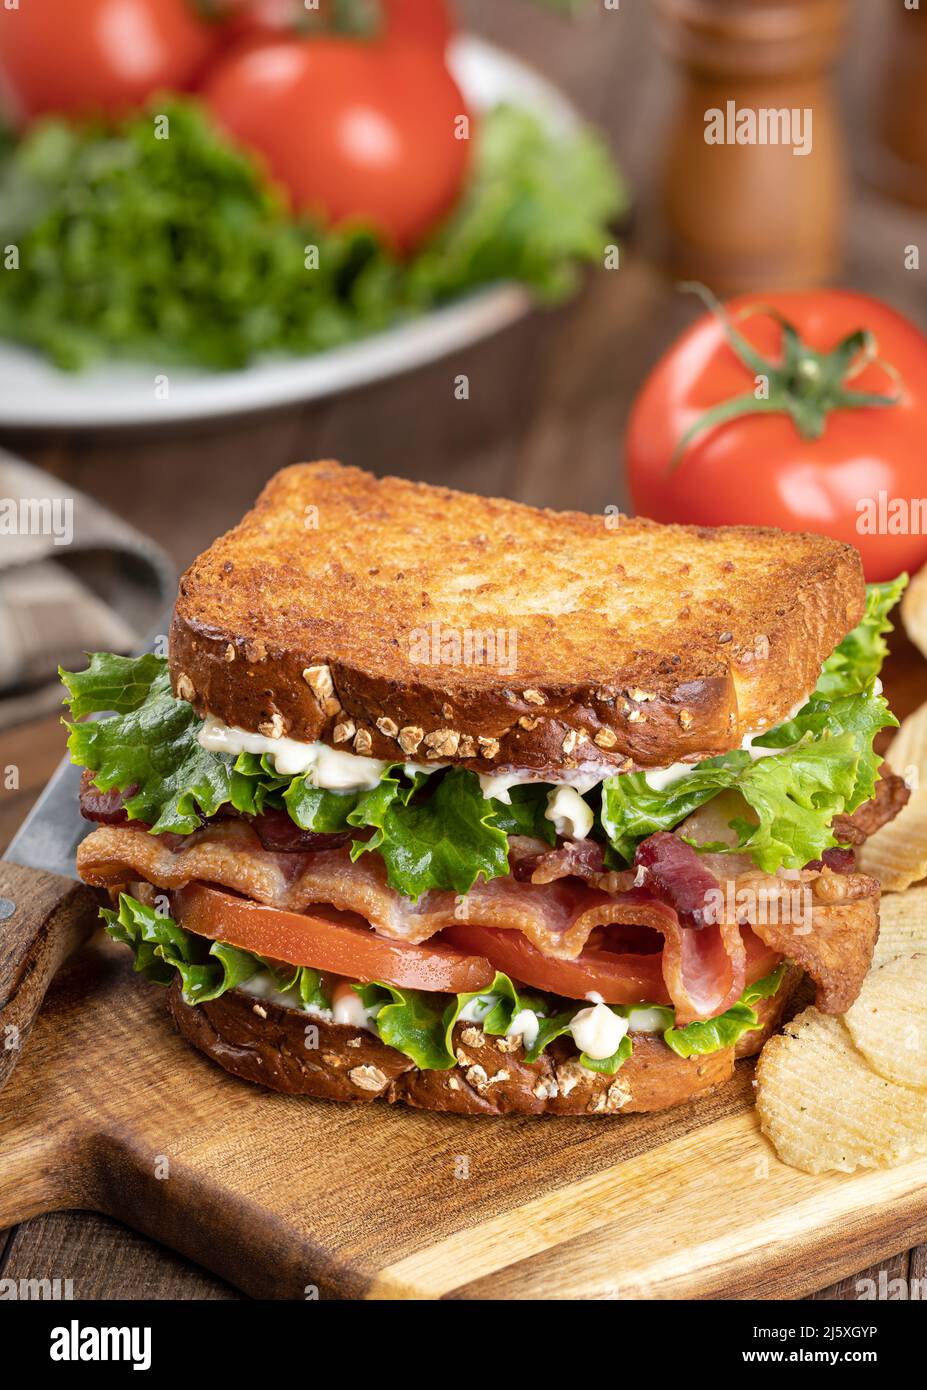 Blt sandwich made with bacon, lettuce and tomato on toasted whole grain bread on a wooden cutting board Stock Photo